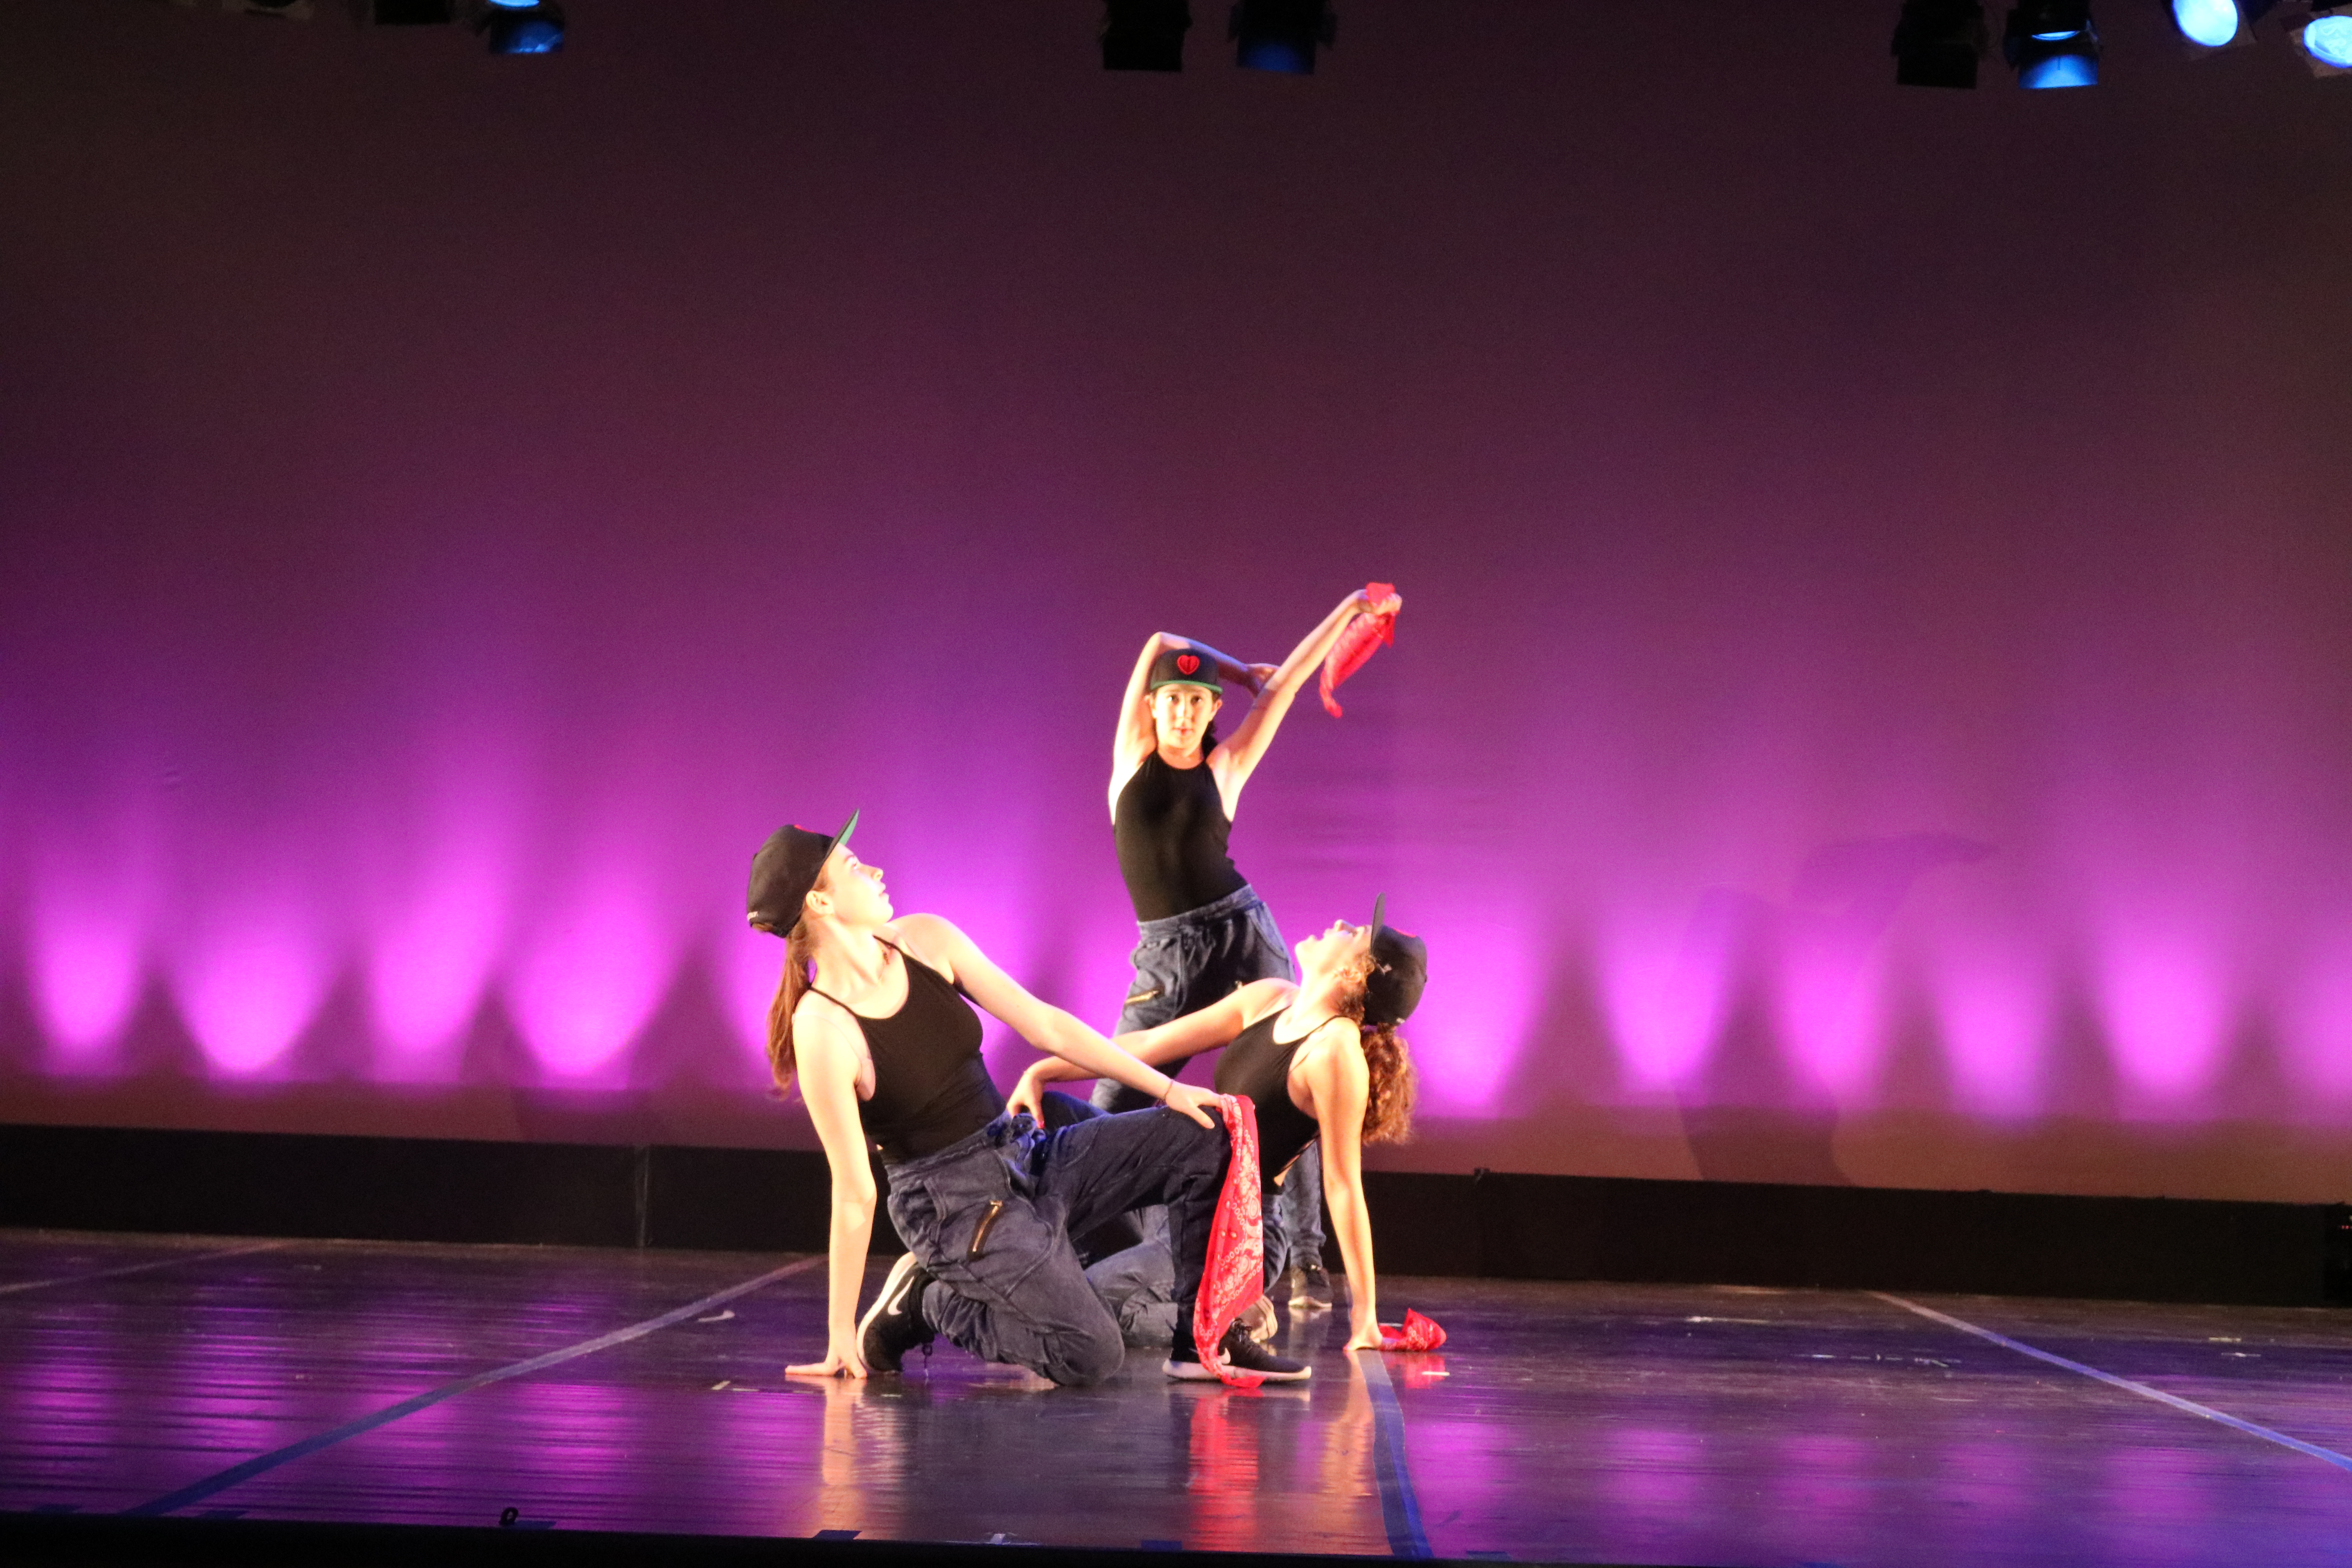 Ellie Pulaski ’18, Mira Chaskes ’20 and Cate Herman ’21 dance to a hip hop mashup.